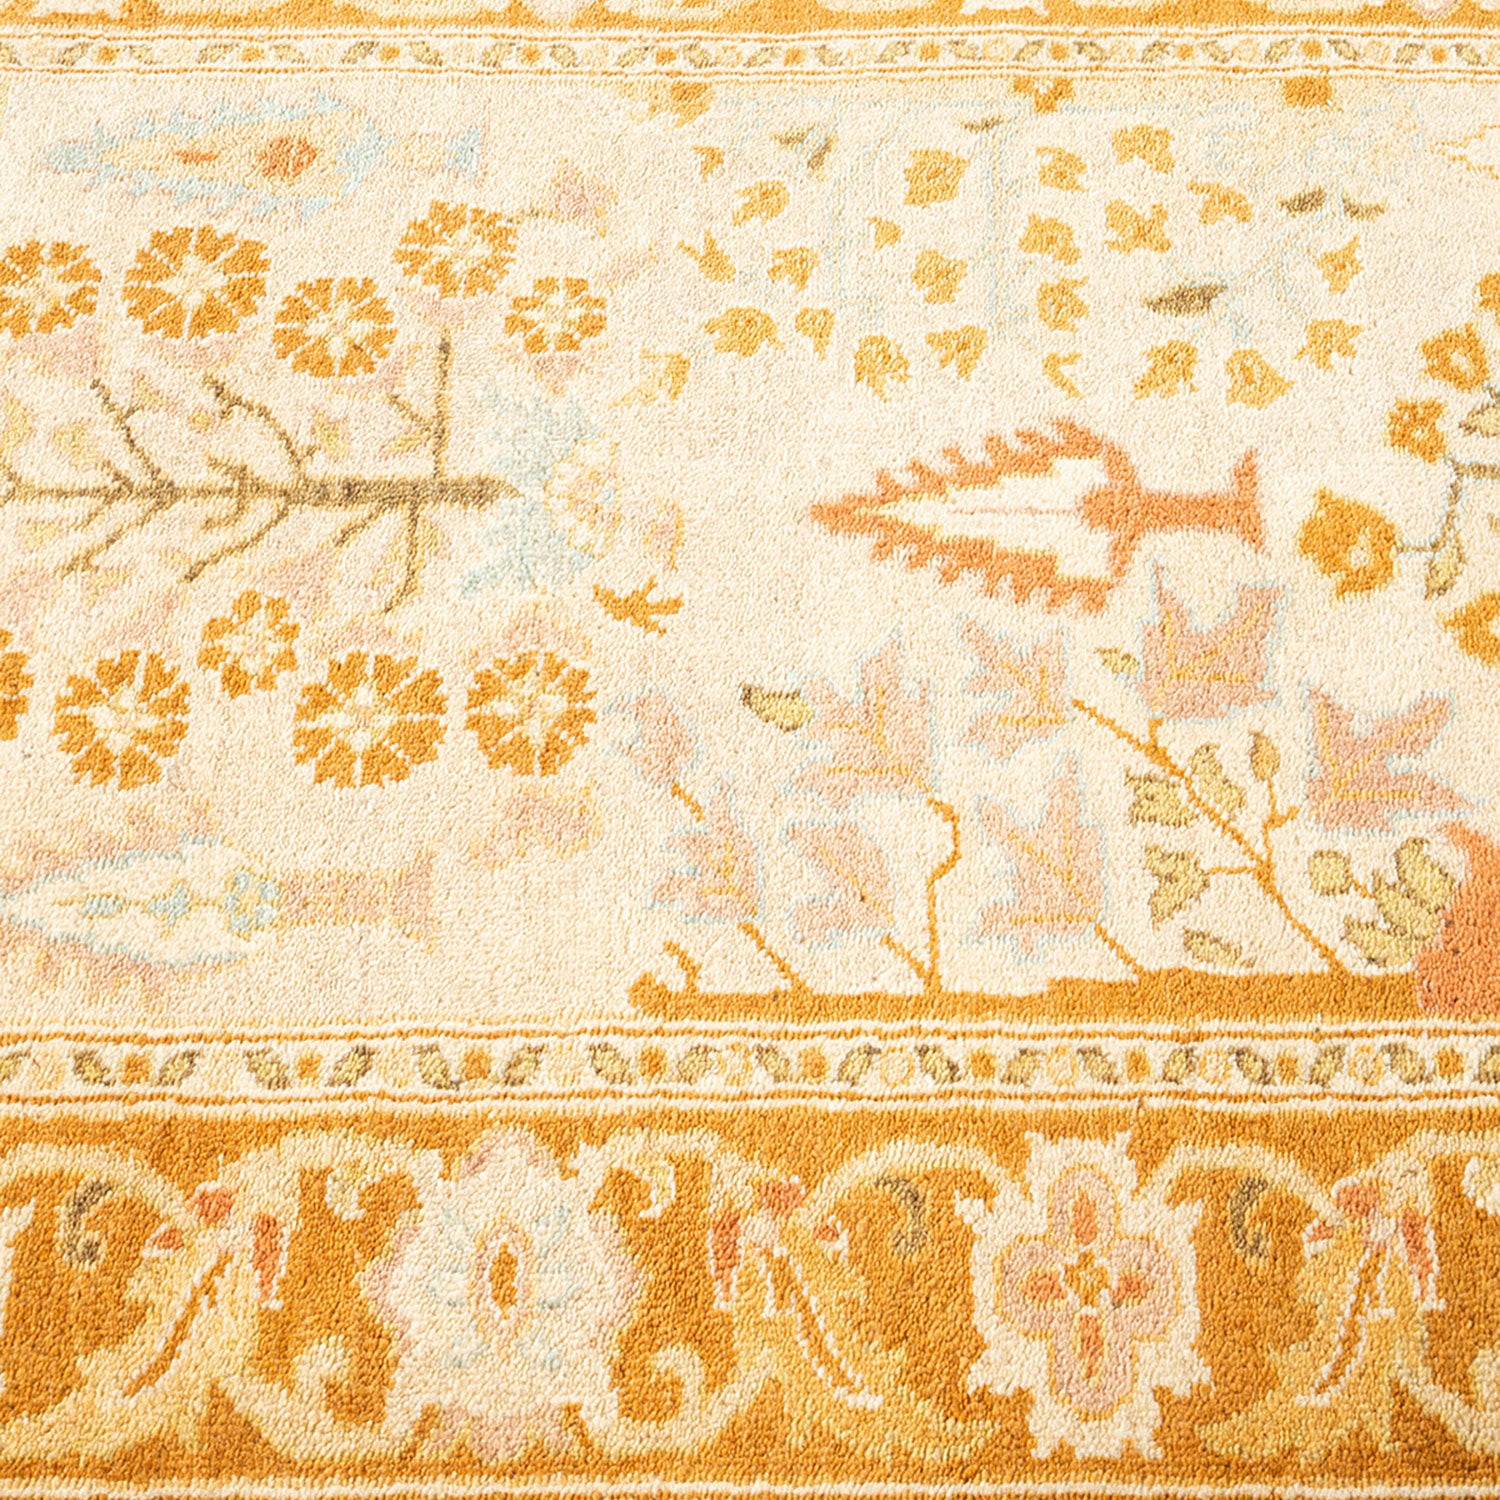 Close-up view of a patterned carpet with warm golden hues